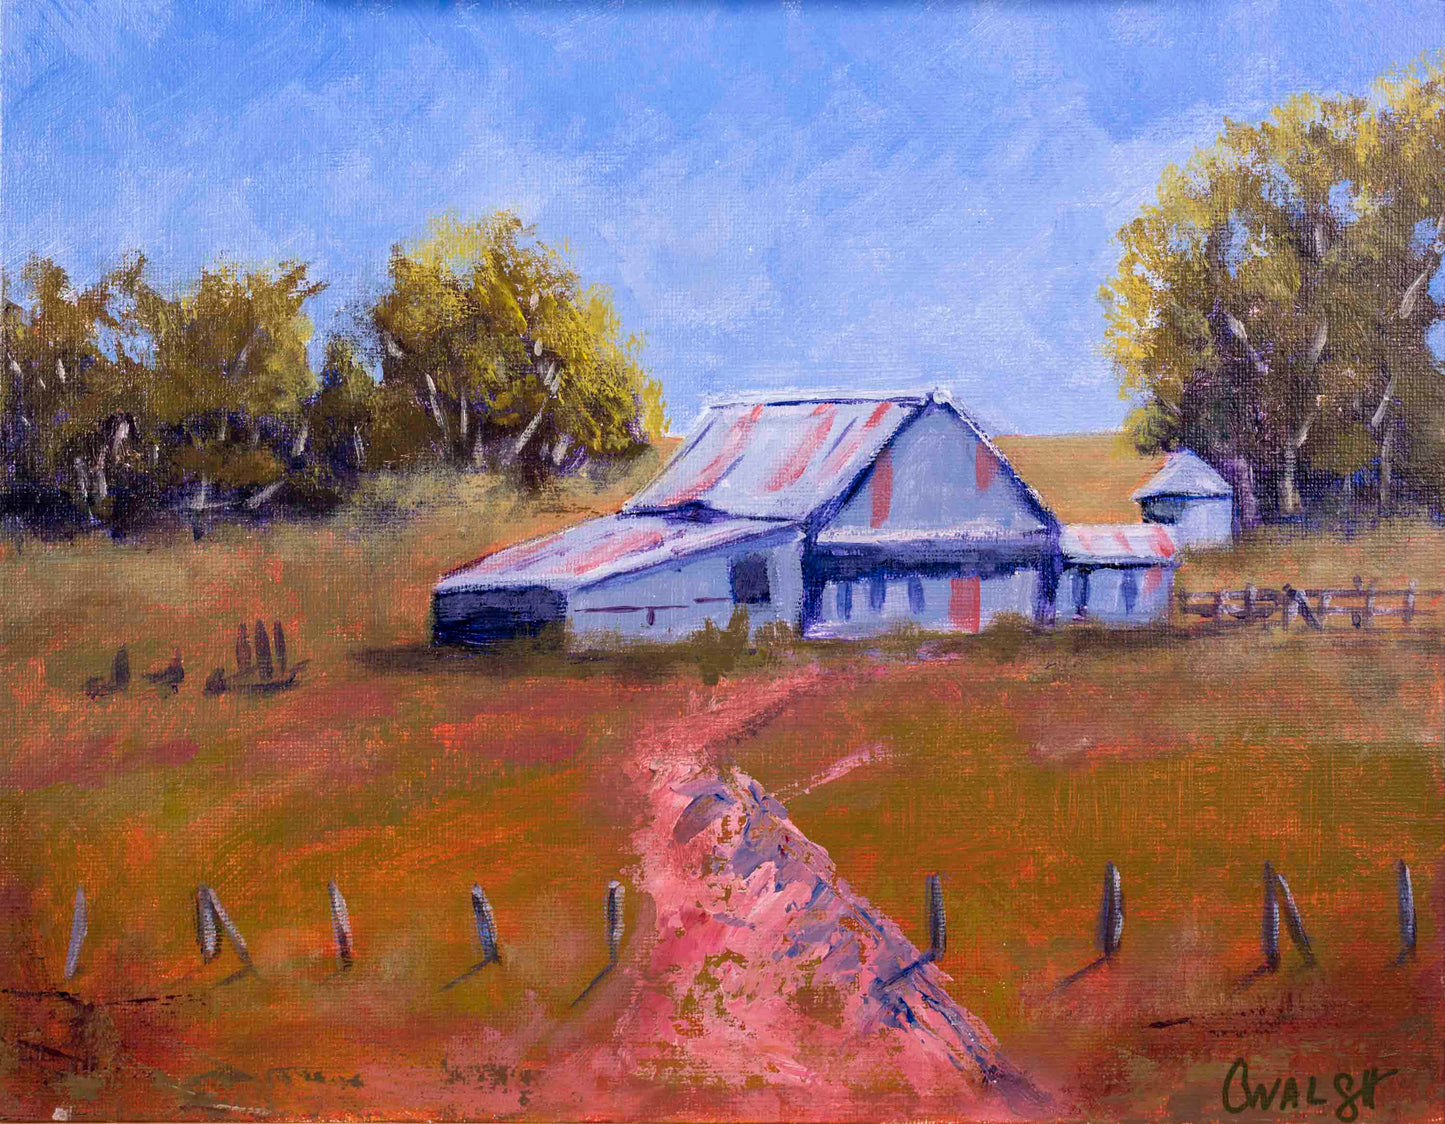 "Old Shearing Shed" Acrylic on Board - 23cm x 30cm (unframed)